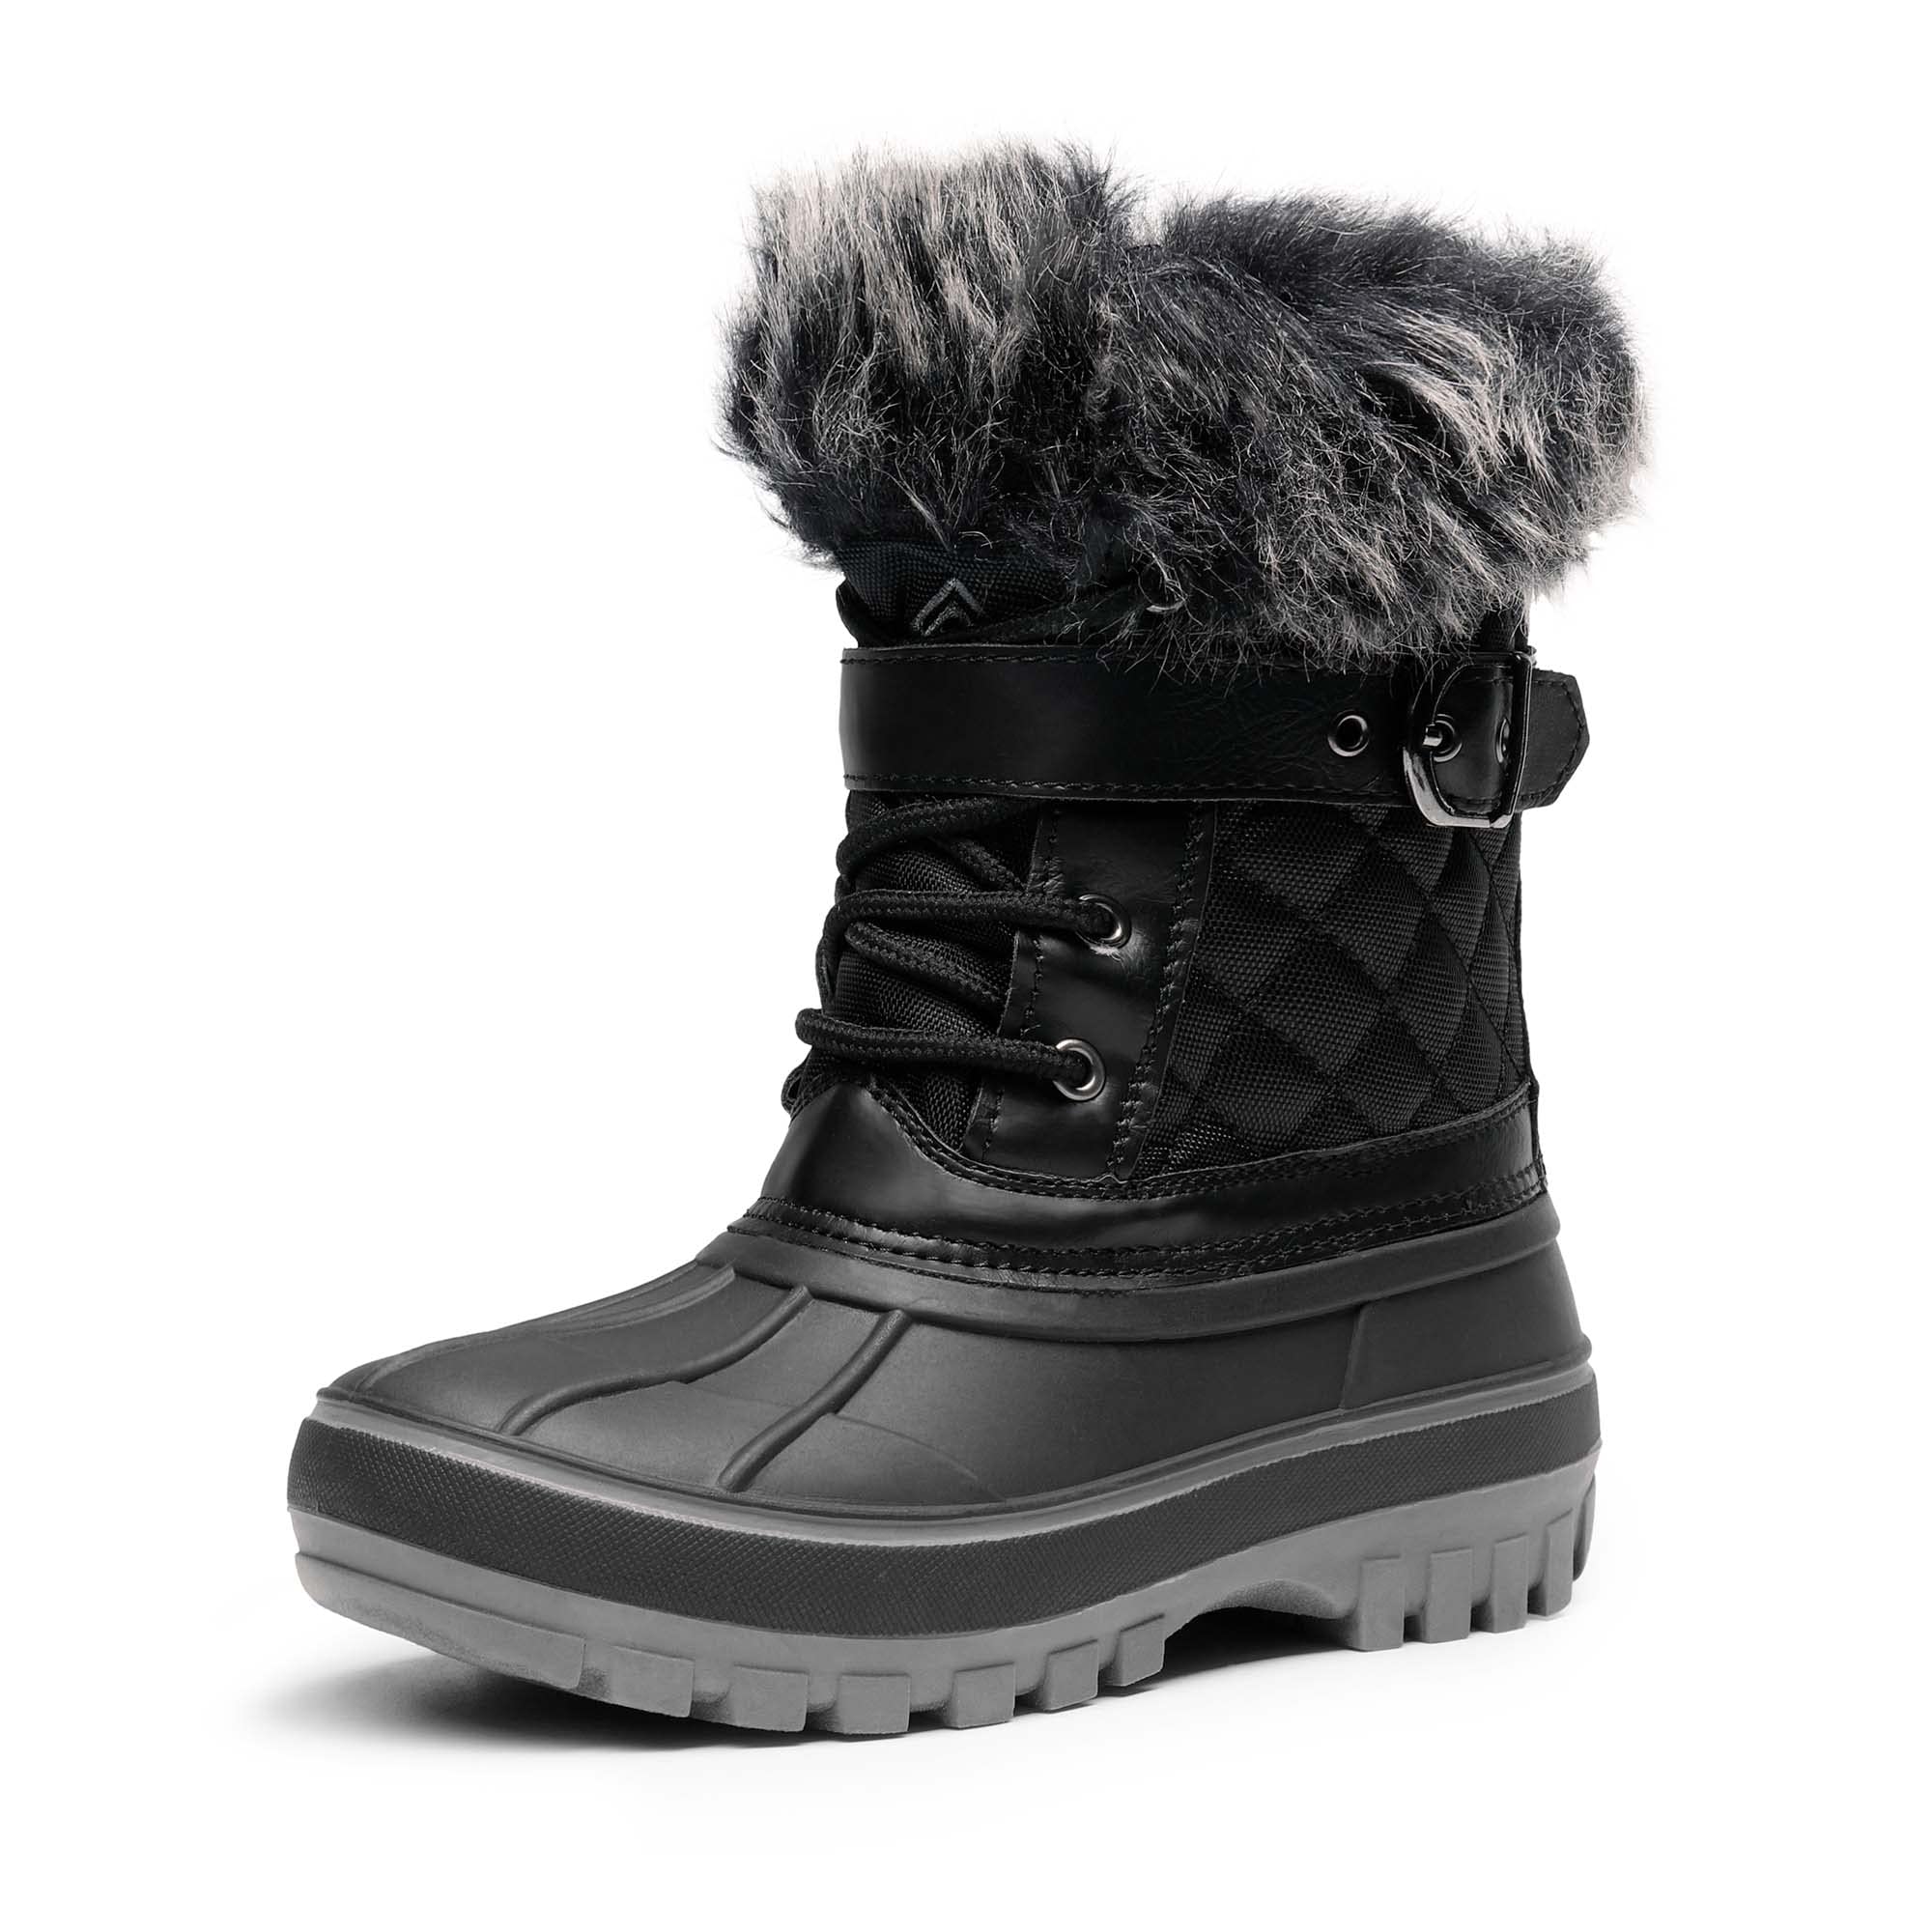 DREAM PAIRS Boys Black Faux Fur-Lined Insulated Waterproof Winter Snow Boots Kriver-3 Size 1 Little Kid